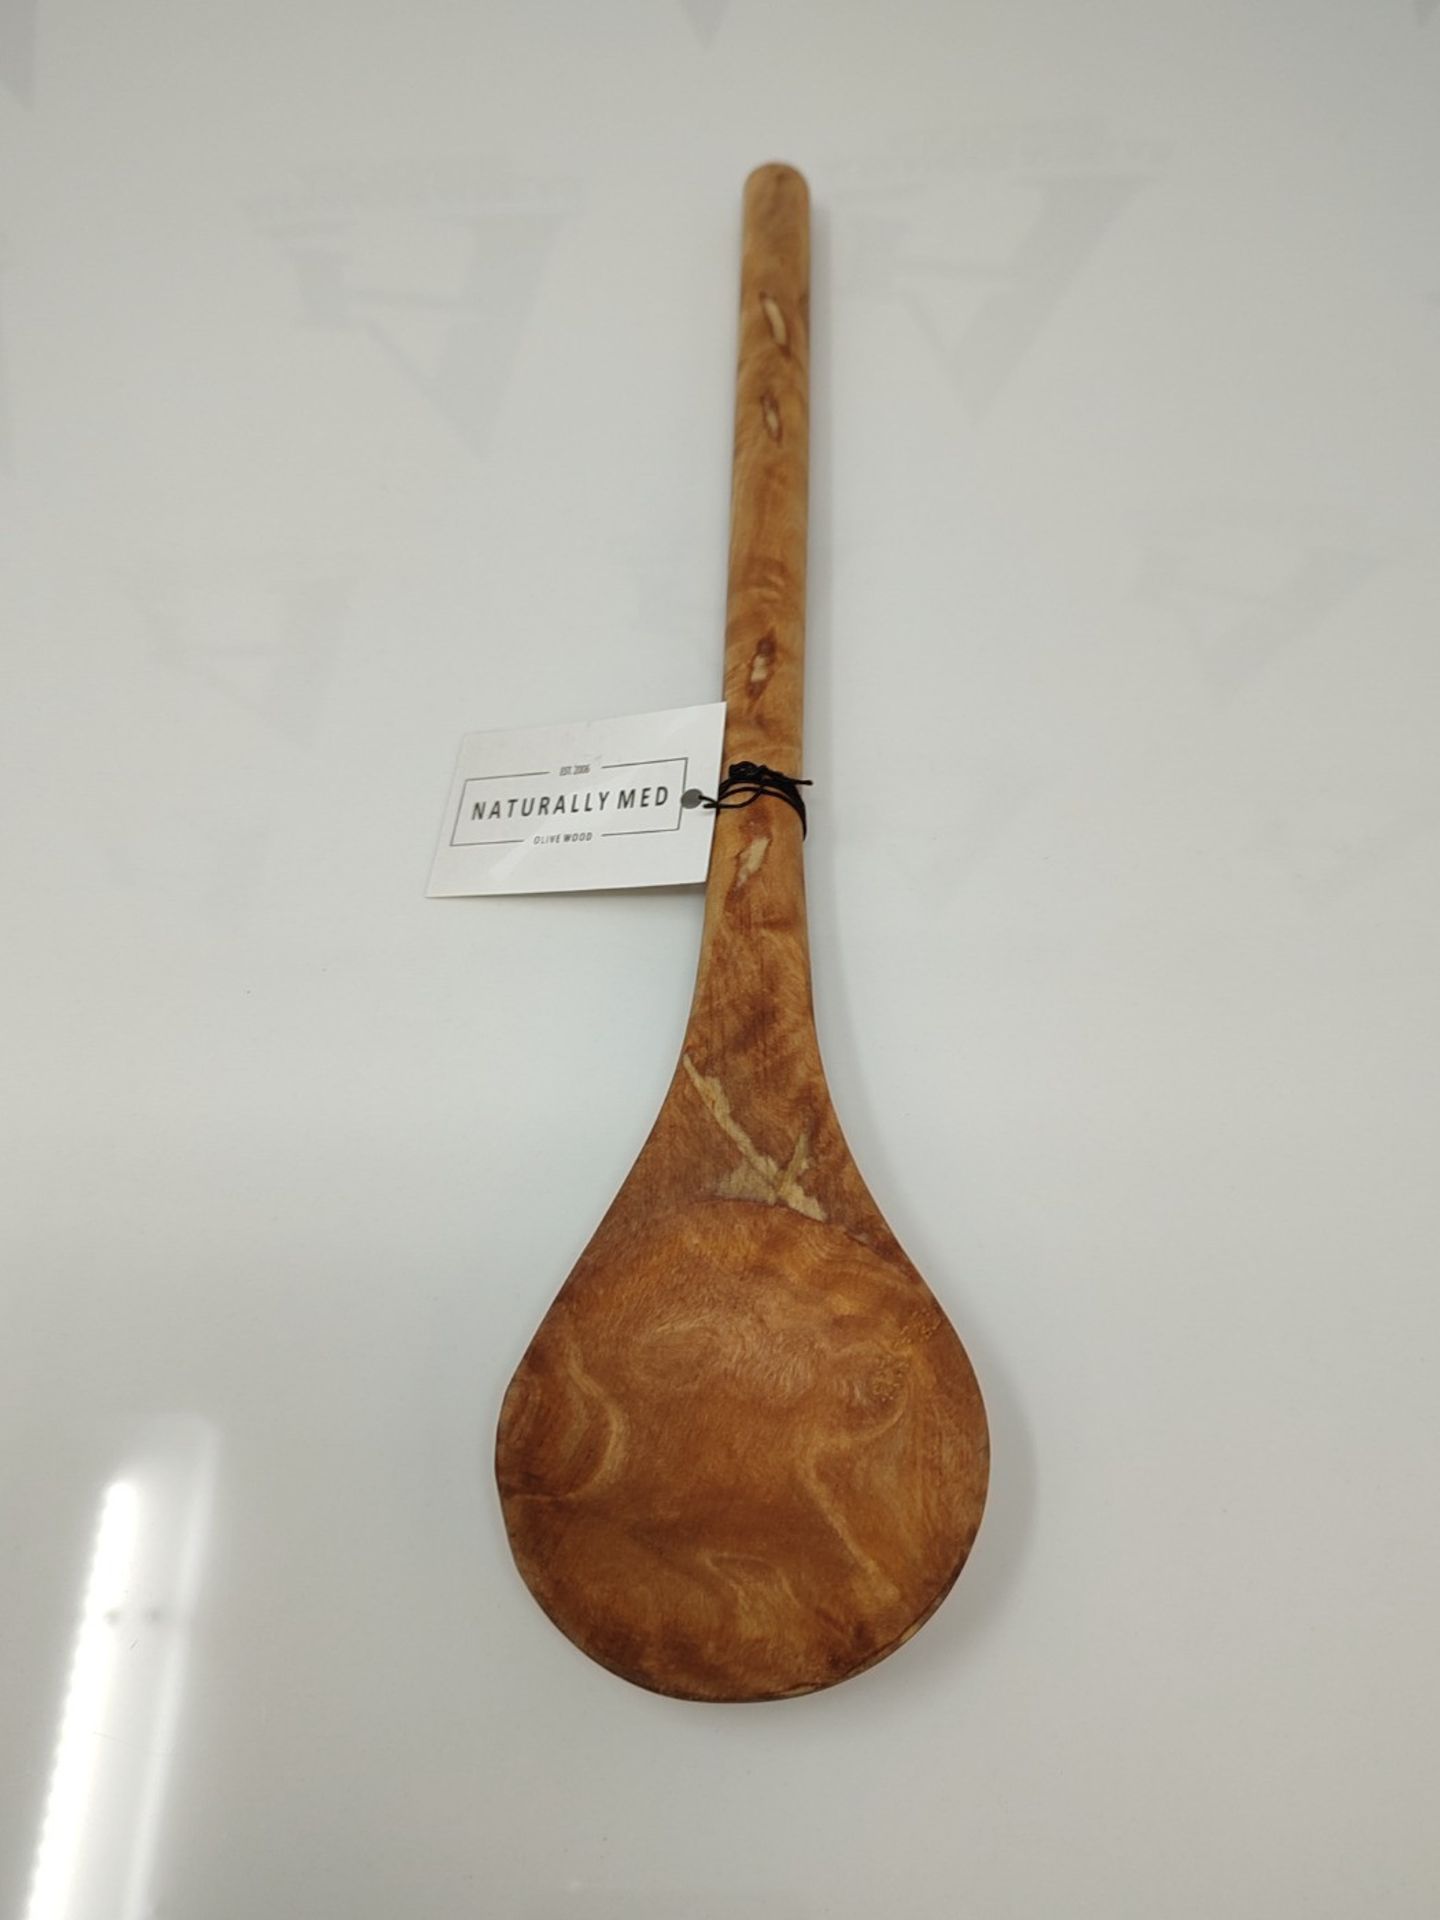 Naturally Med NM/OL042 Round Spoon,Brown,30 cm - Image 2 of 2